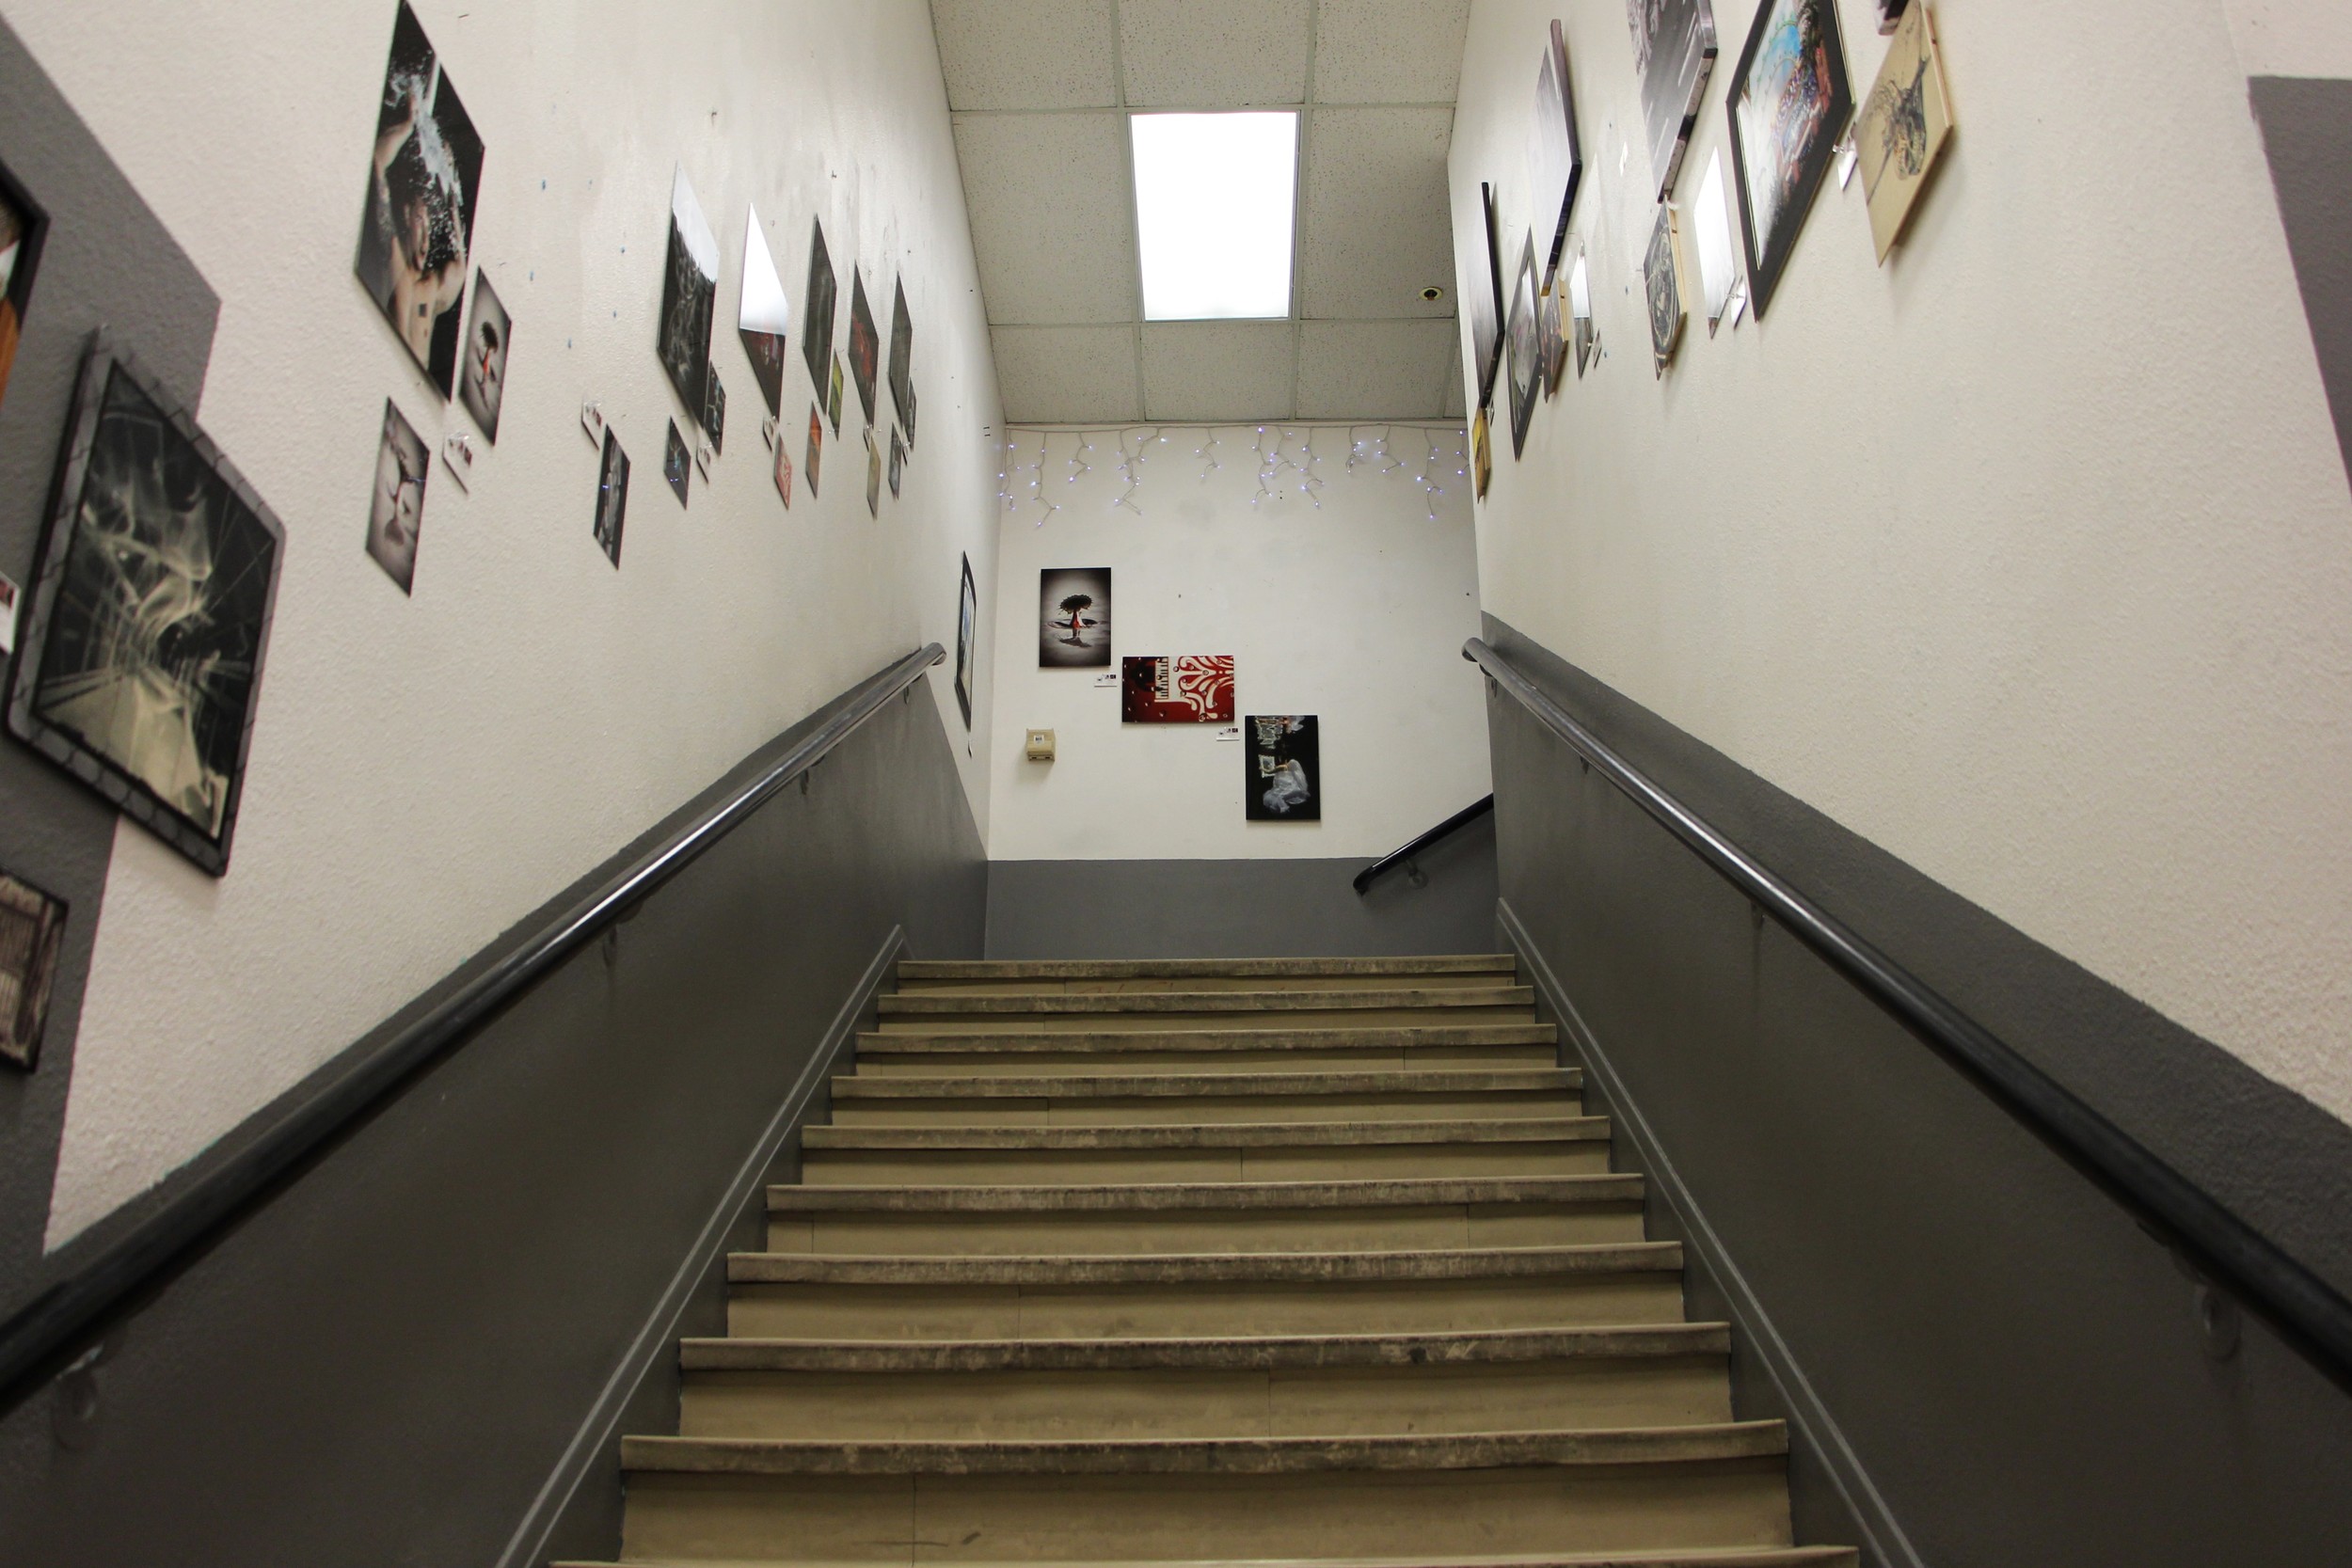 The anything is possible stairs at Emergency Arts